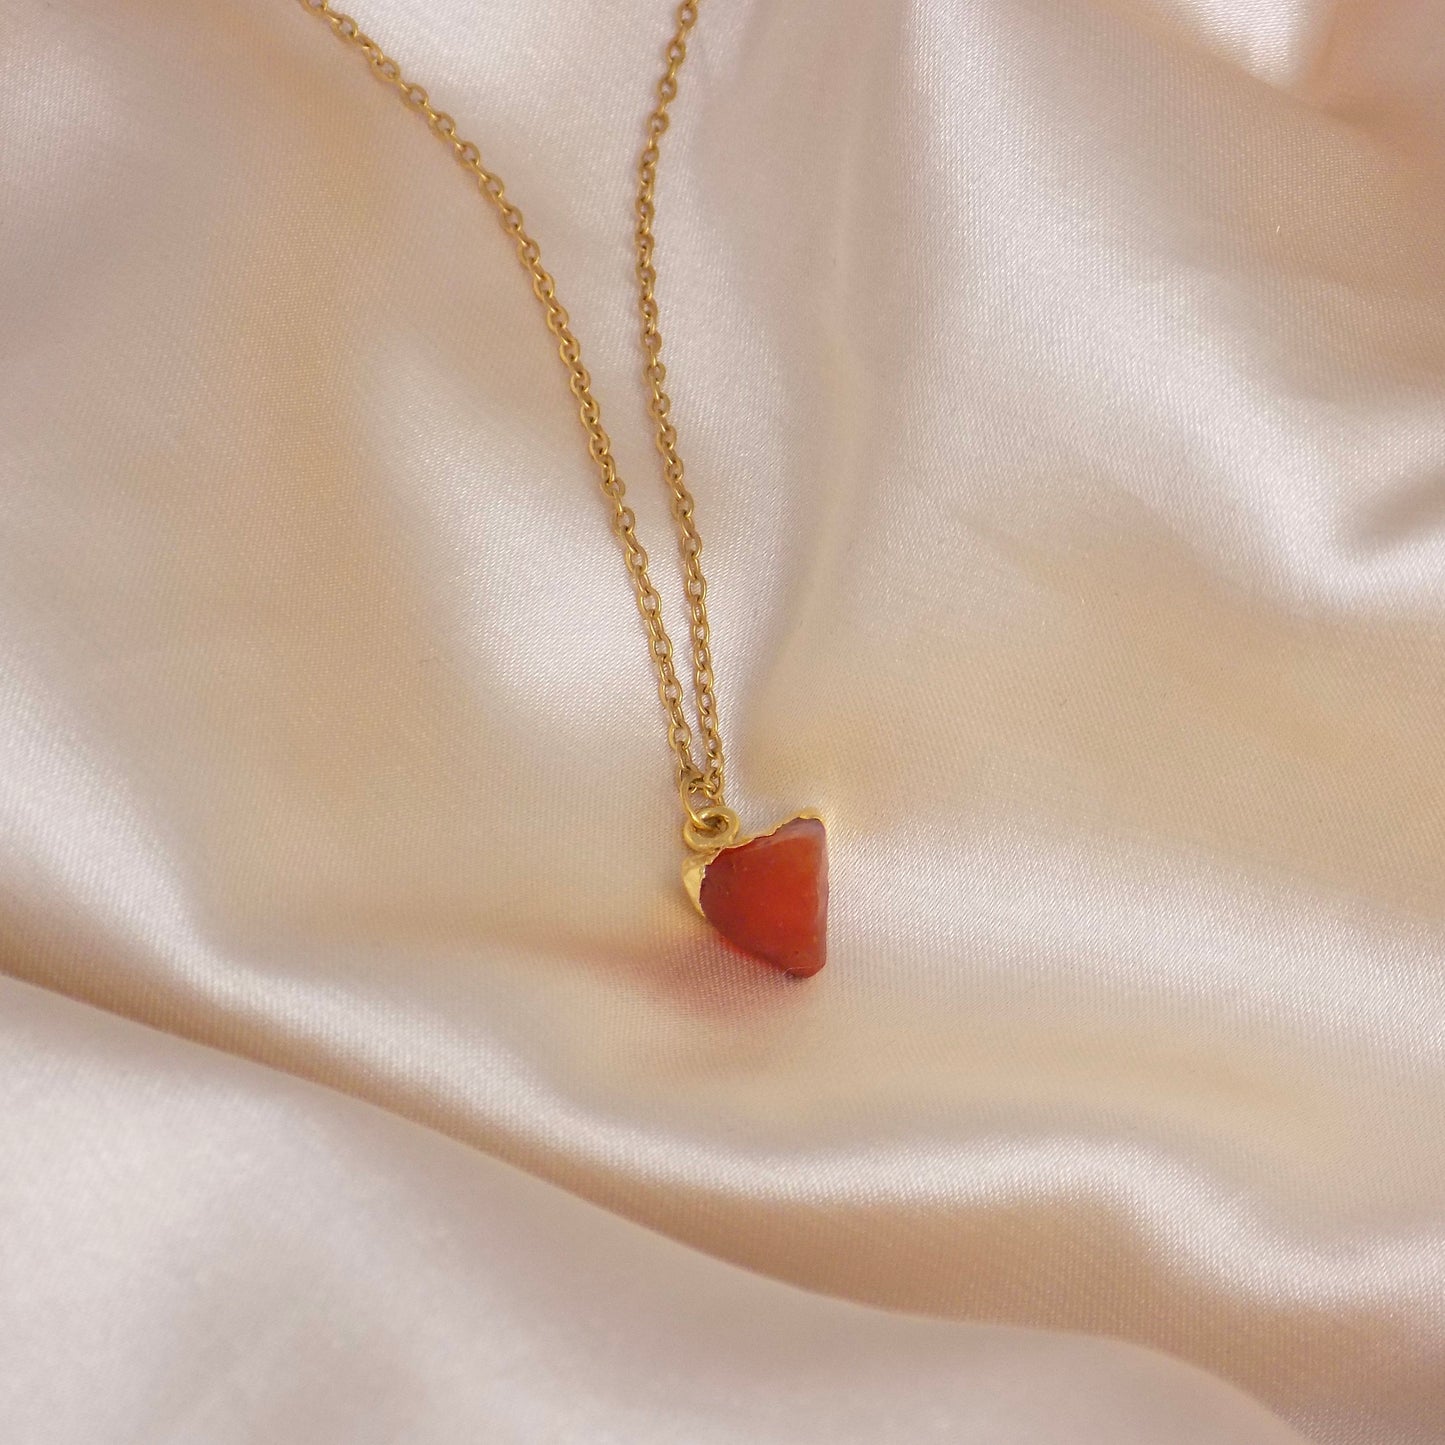 Raw Carnelian Necklace Gold, Orange Crystal Pendant Necklace For Layering, Gift For Mom, M7-16